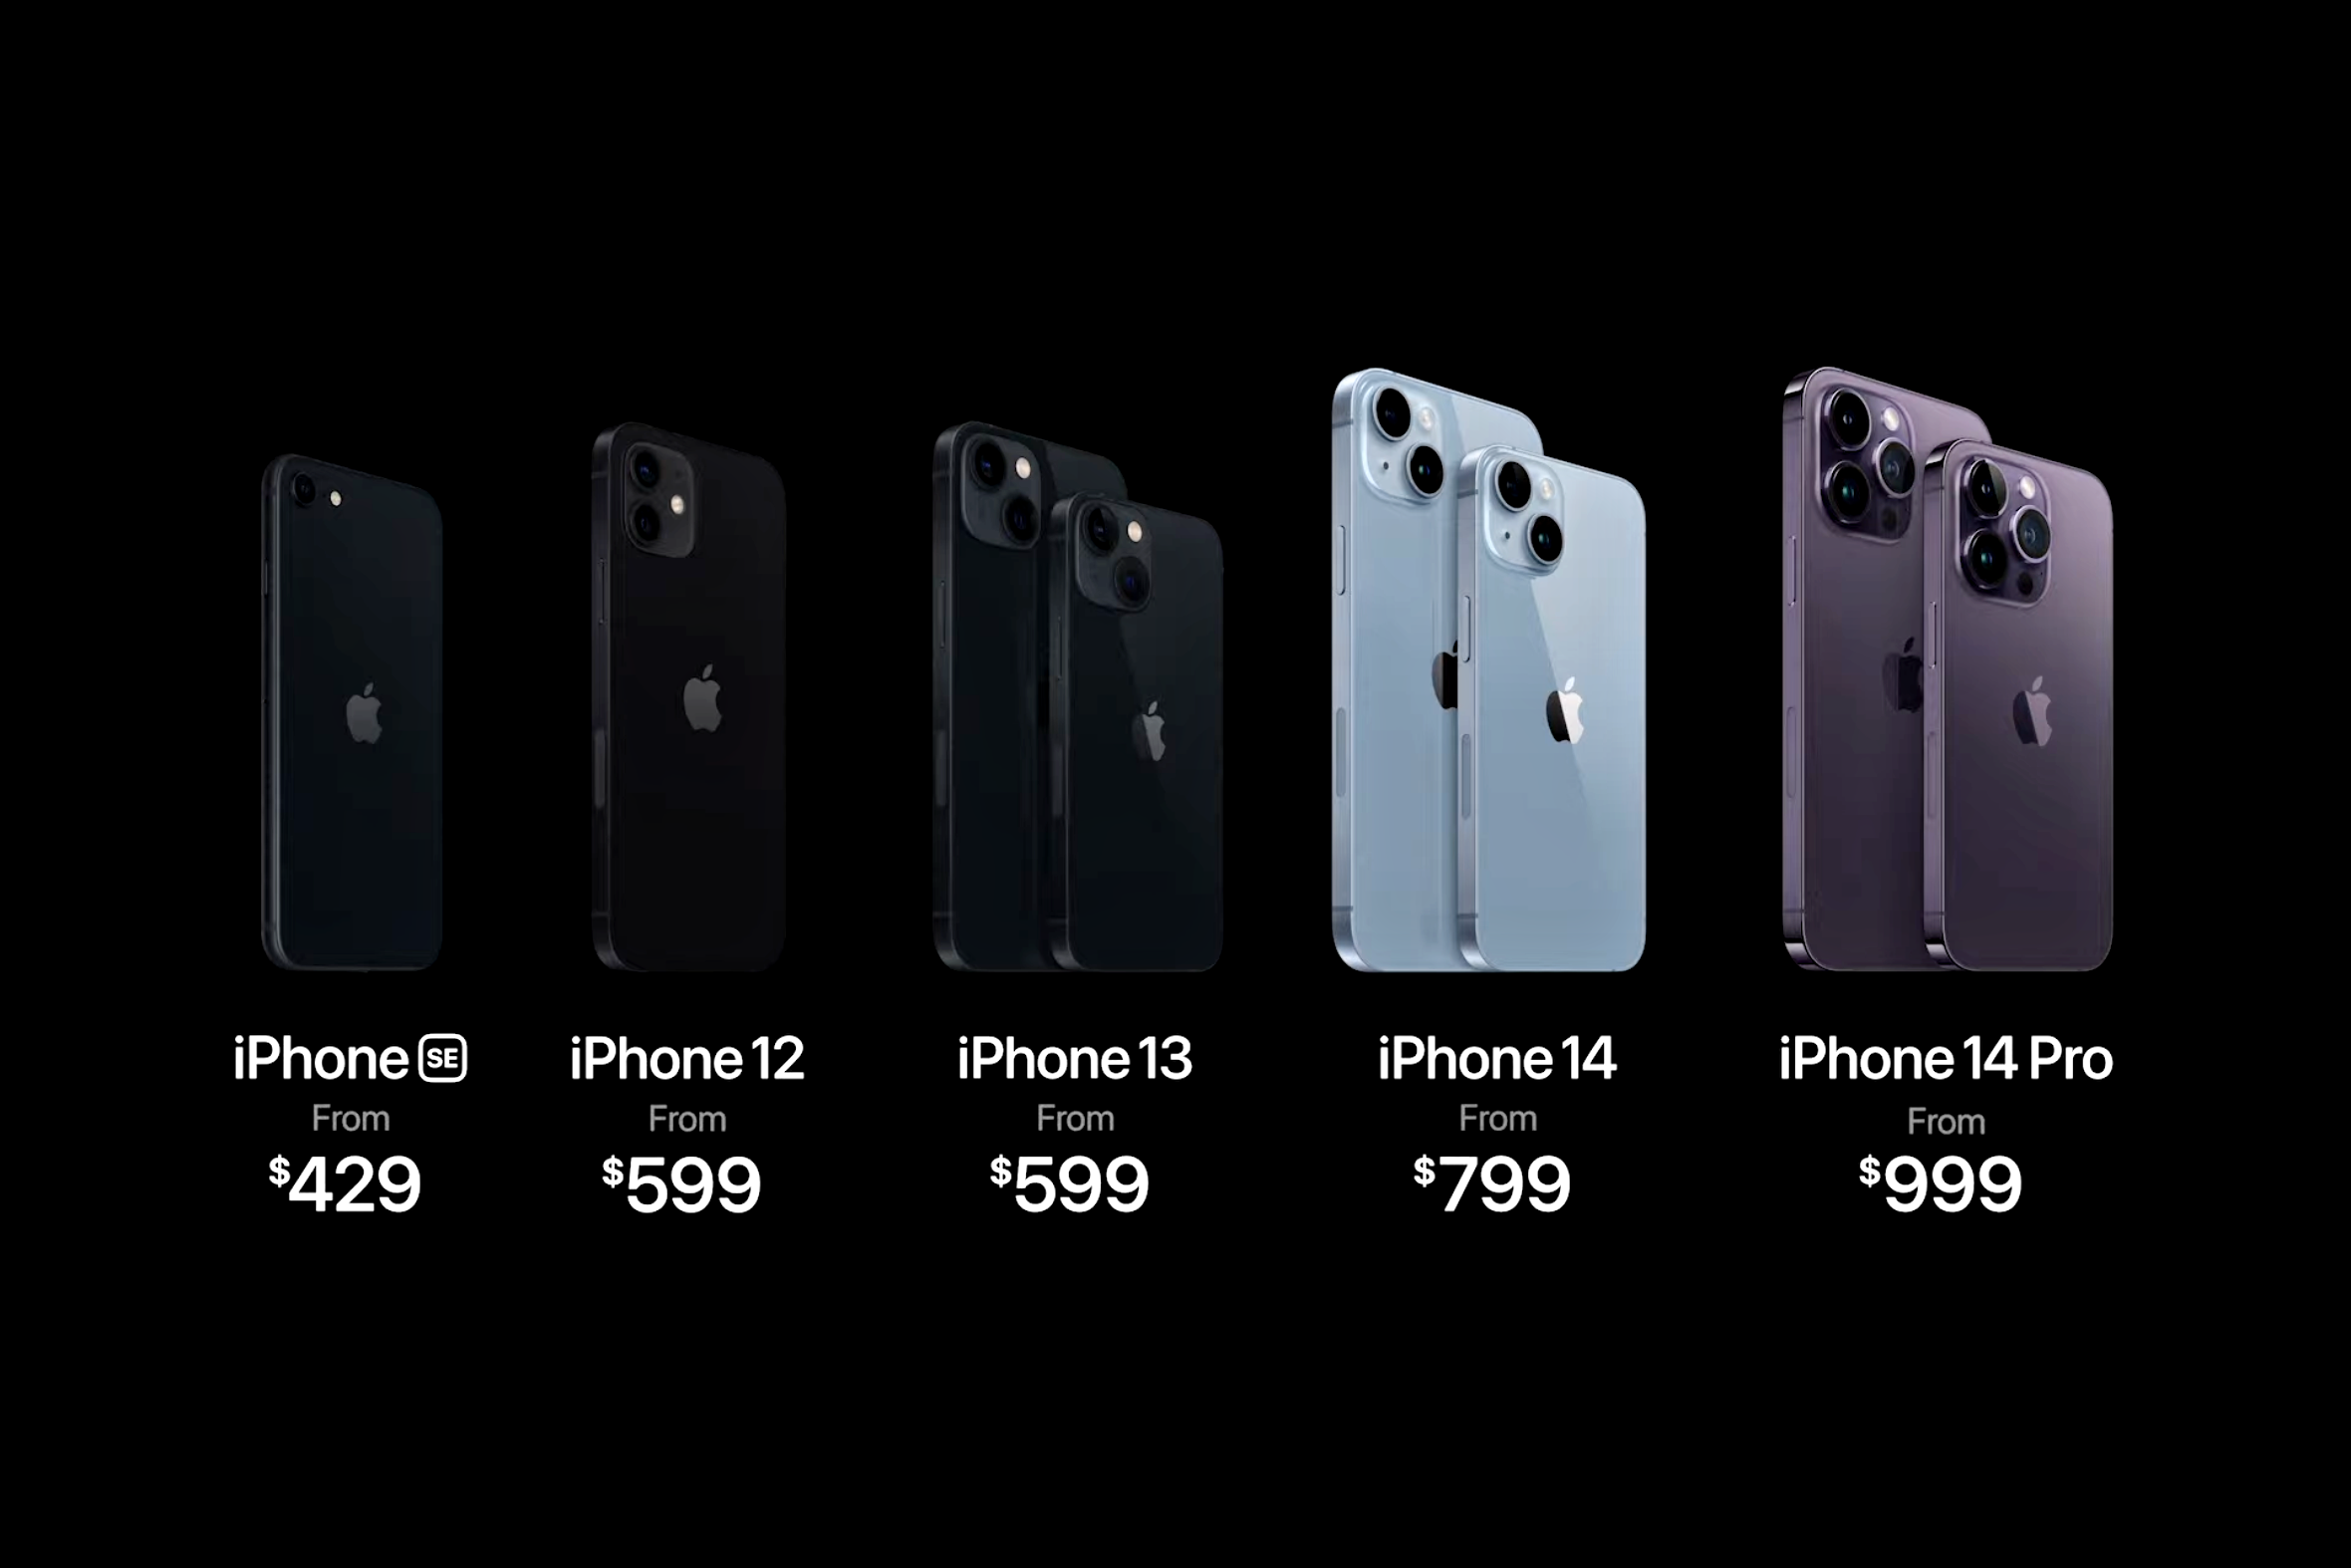 Apple&#039;s lineup after the iPhone 14 reveal - Apple&#039;s refreshed iPhone lineup ditches two models, check out which